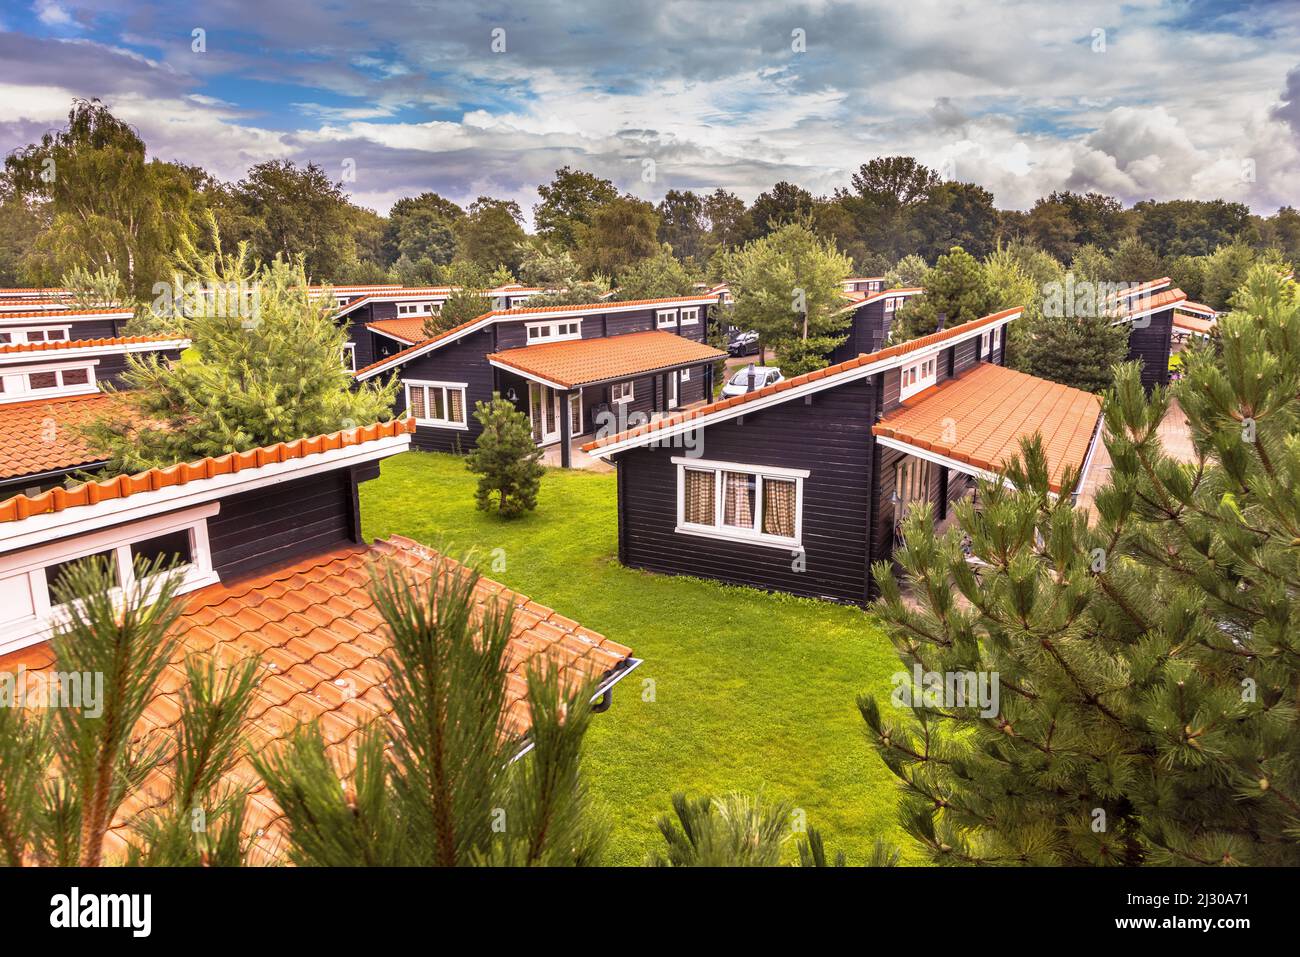 Holiday Bungalow park with identical cottages in symetrical order in green forested area. Wooden chalets with orange roof tiles in grass and bushes. N Stock Photo